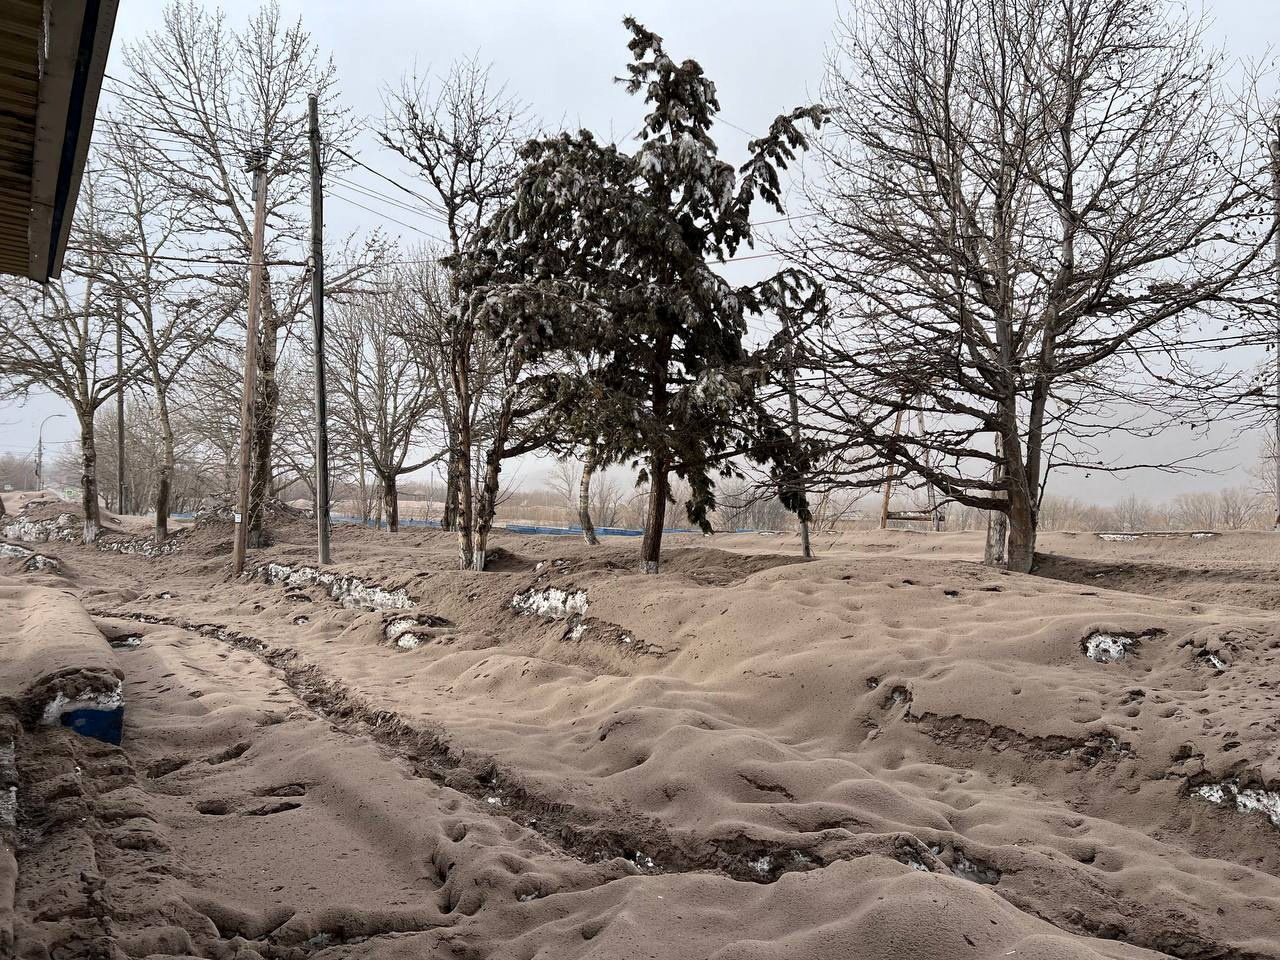 A view shows a street covered in volcanic dust following the eruption of Shiveluch volcano in the settlement of Klyuchi